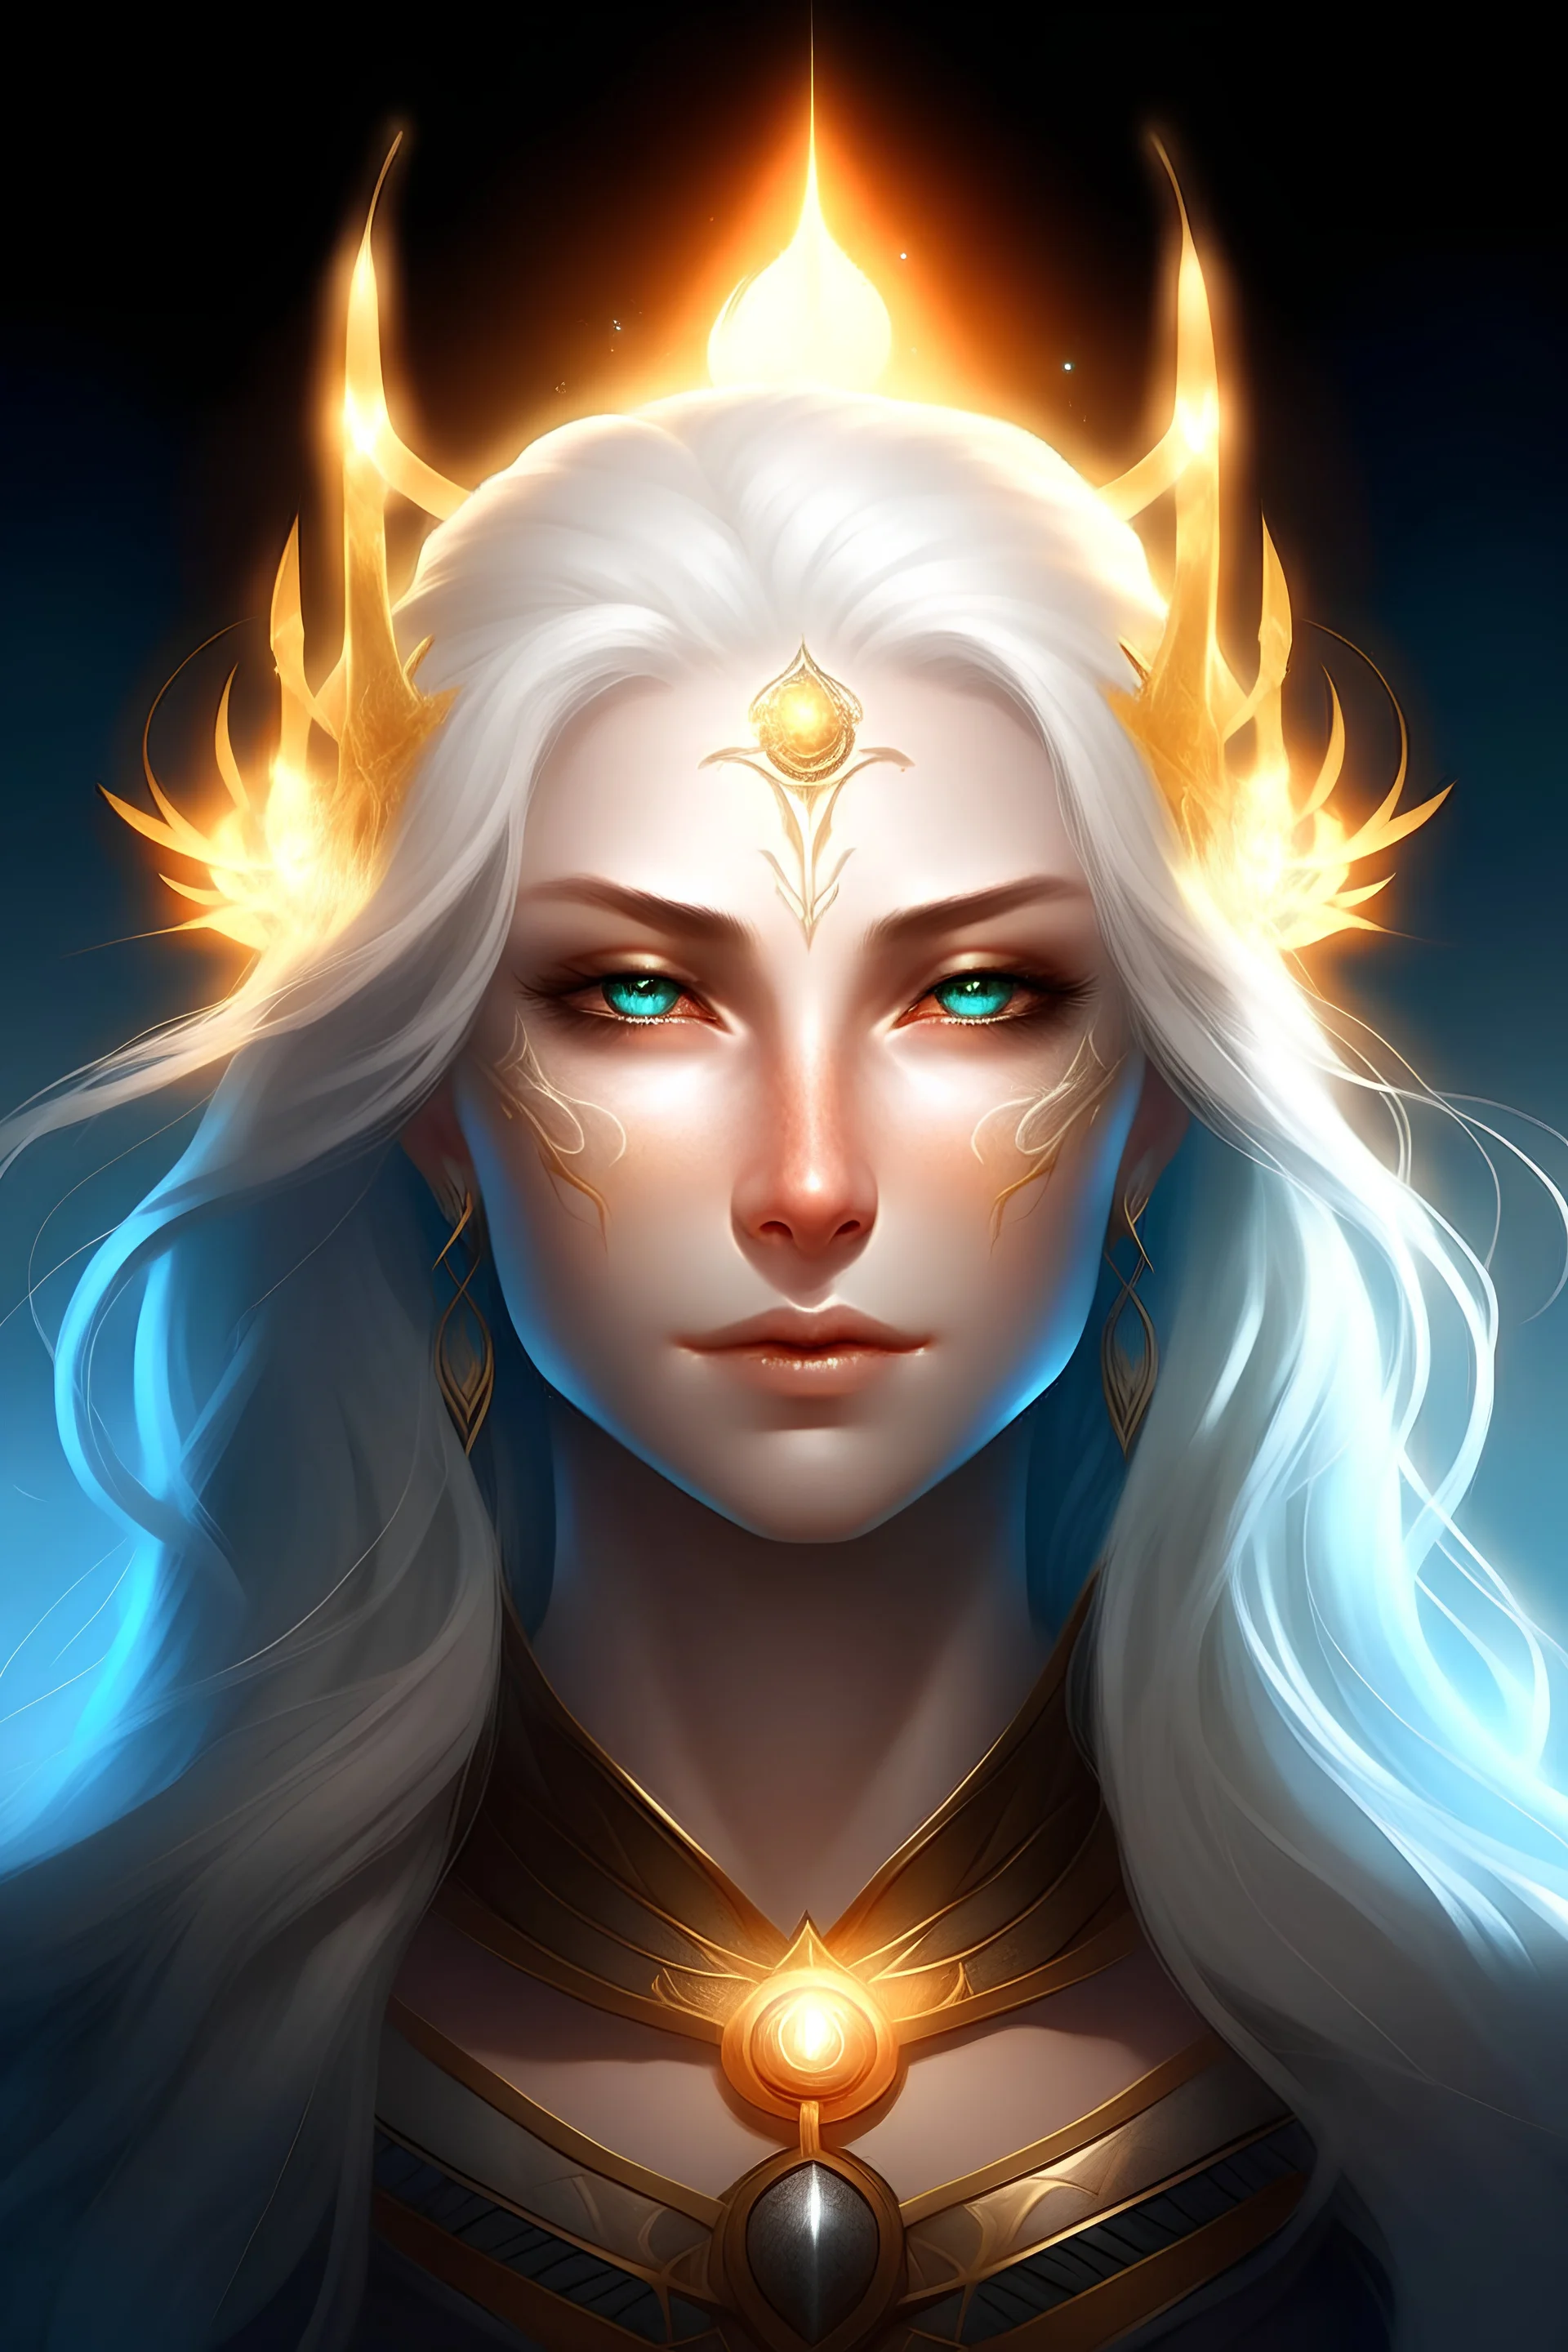 Generate a dungeons and dragons character portrait of the face of a female, peace aasimar that looks like a high blessed by the goddess Selune. She has white hair and glowing eyes and is surrounded by holy light